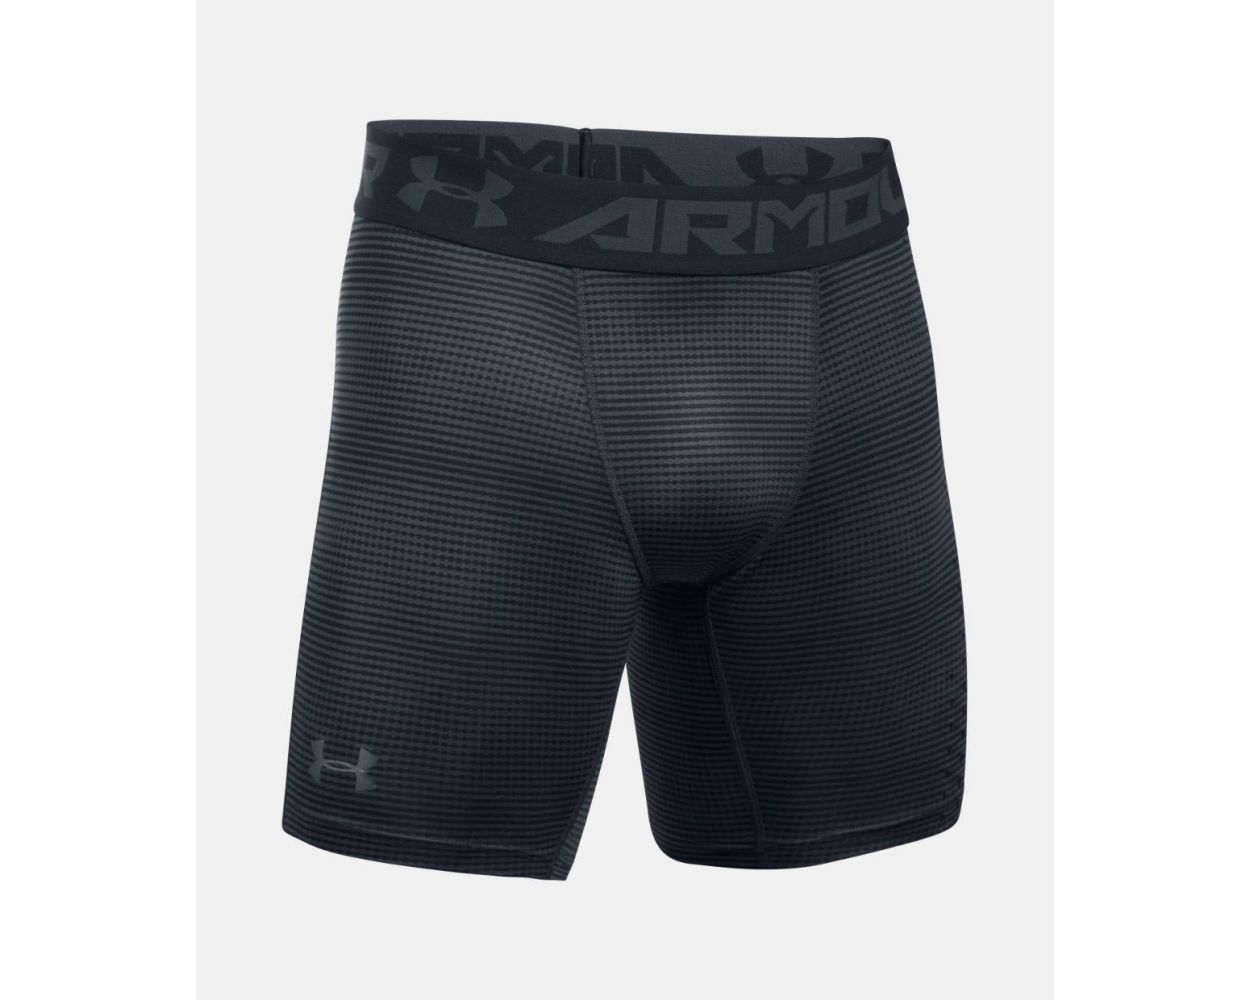 Under Armour HeatGear Coolswitch Armour Compression Shorts